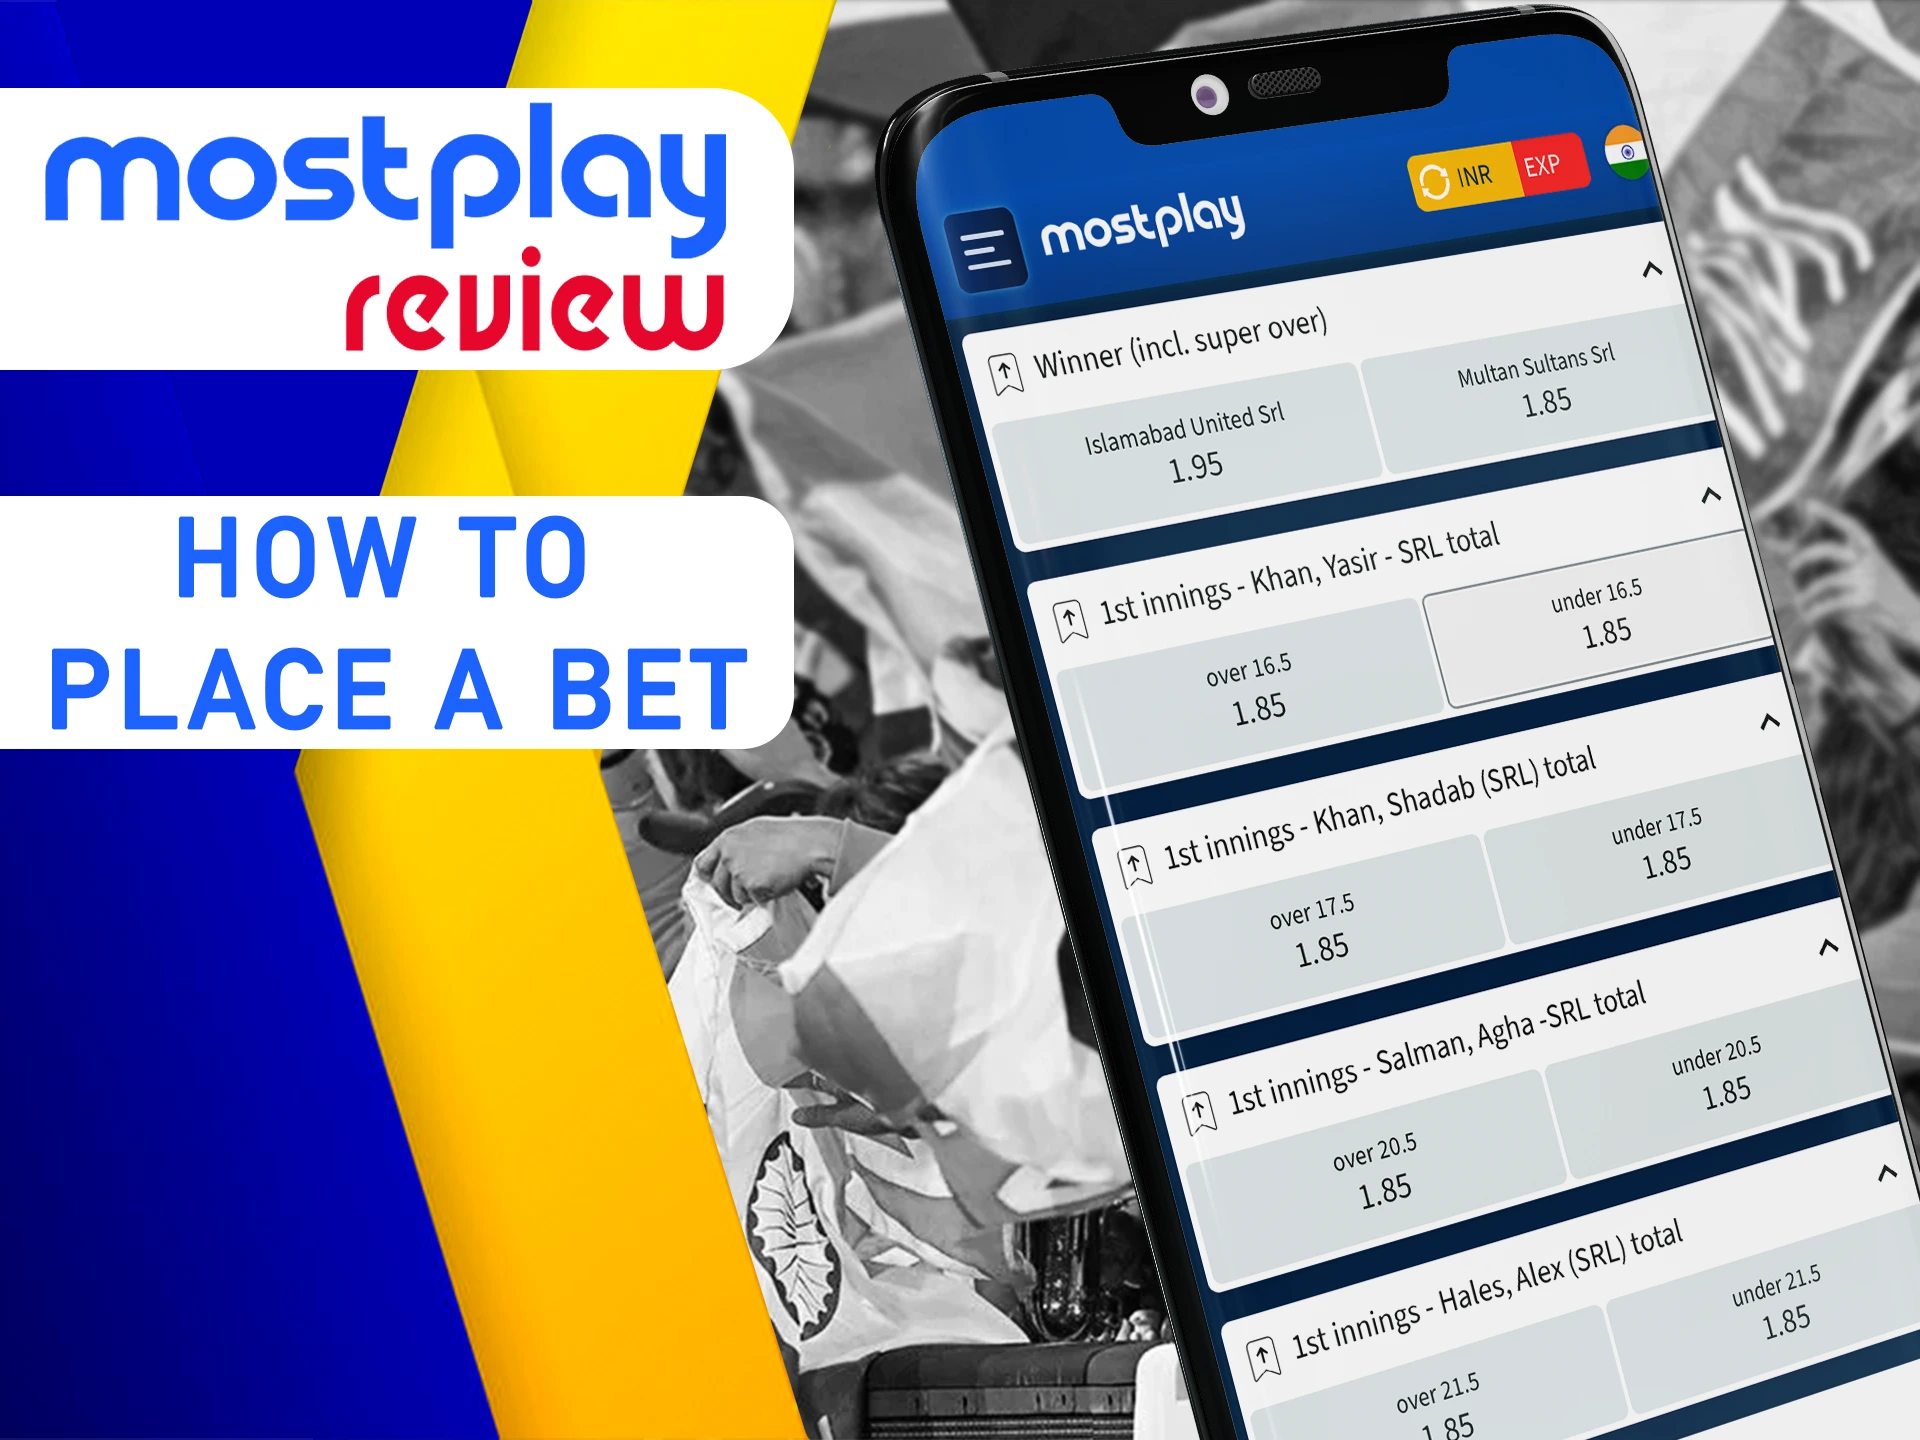 It's easy to place bets at Mostplay.